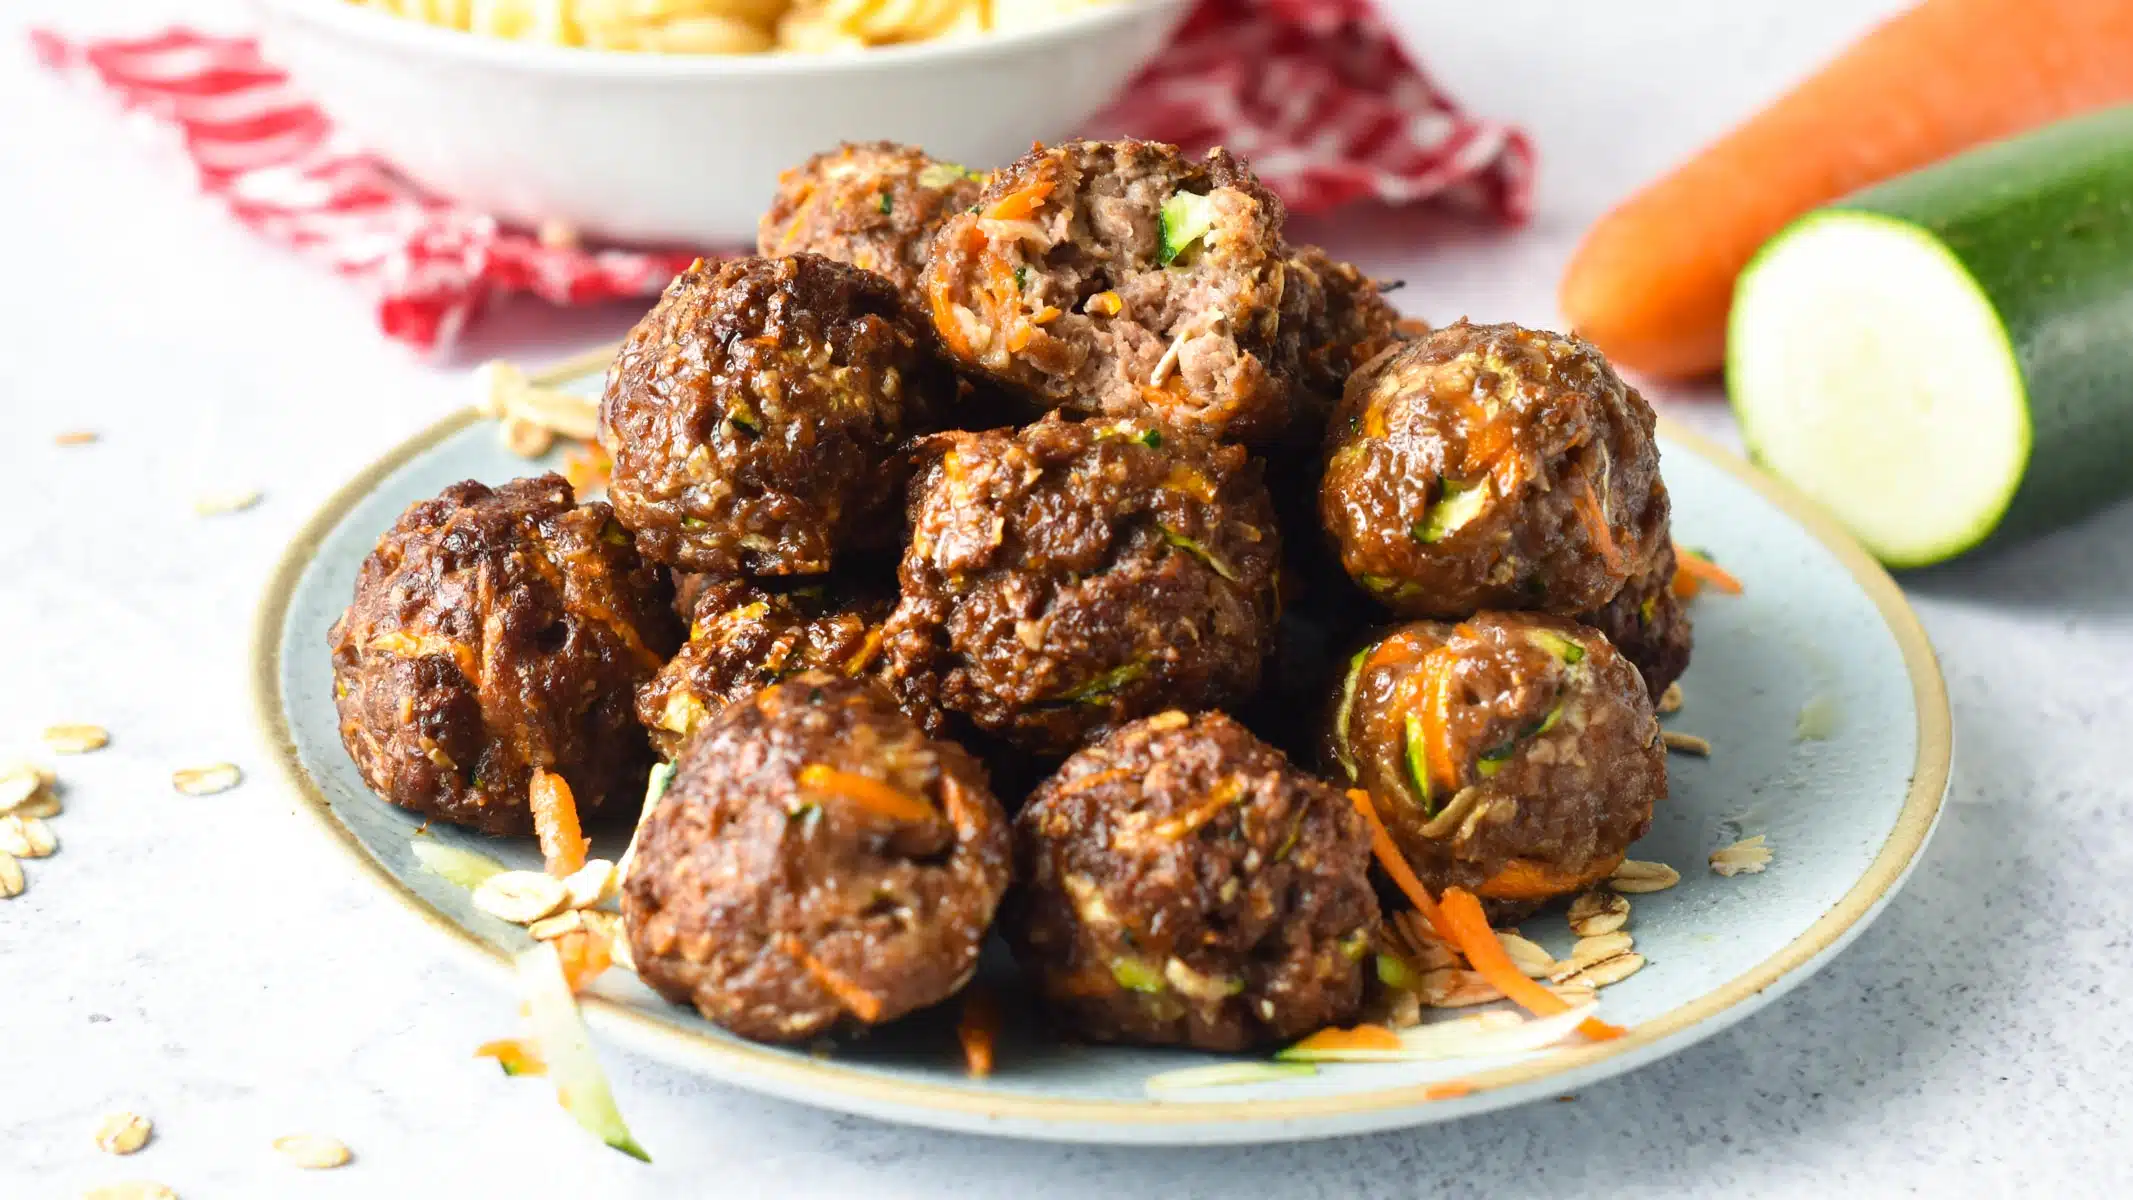 These Meatballs for dogs are easy healthy meatballs for your furry pet. They are packed with vegetables, lean ground meat, and fiber from oats.